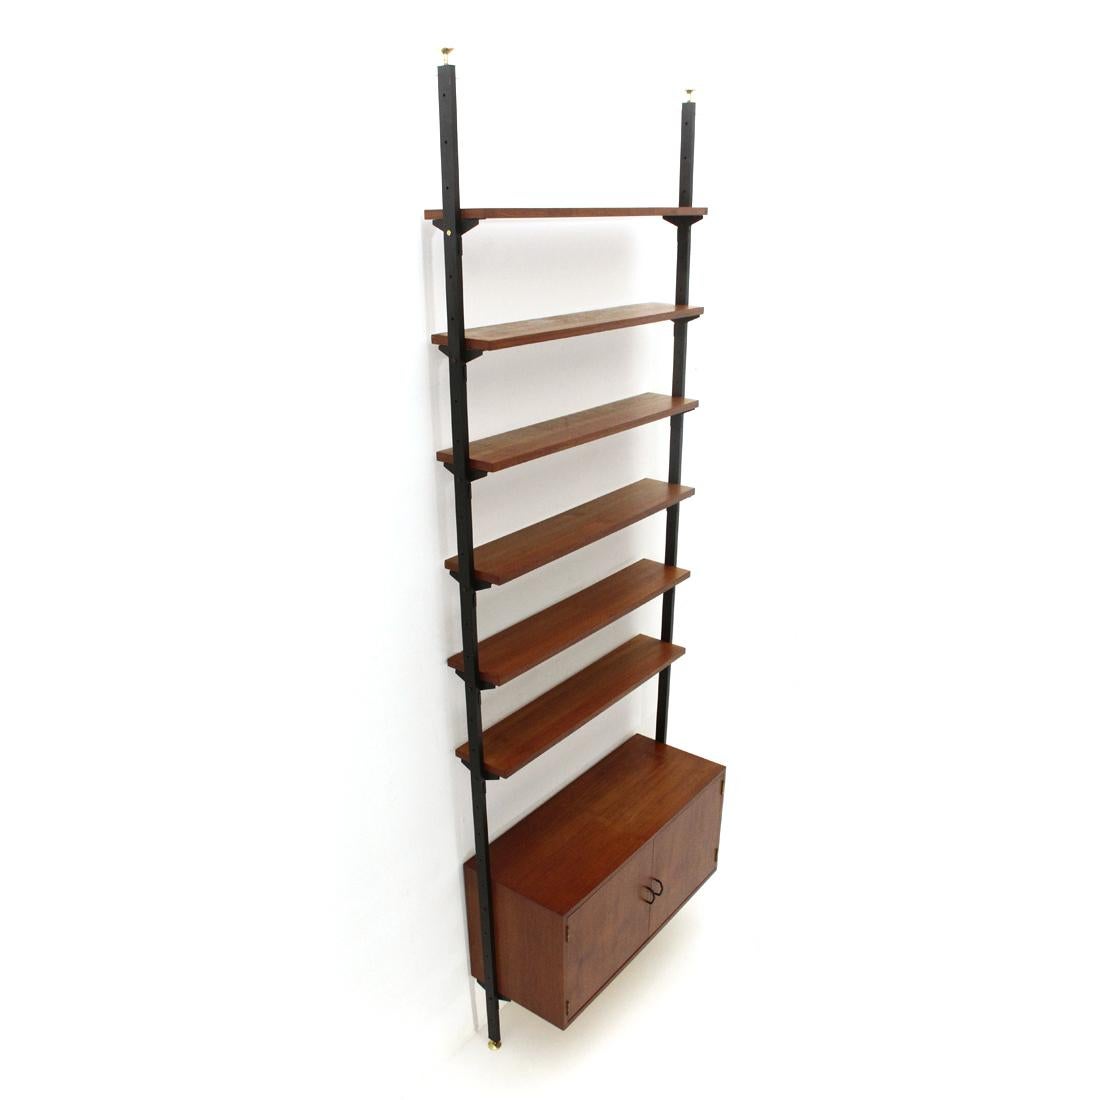 Italian-made bookcase produced in the 1960s.
Uprights in black painted metal with height-adjustable brass feet.
Container in teak veneered wood, handles in black painted metal.
Shelves in teak veneered wood.
Good general condition, some signs